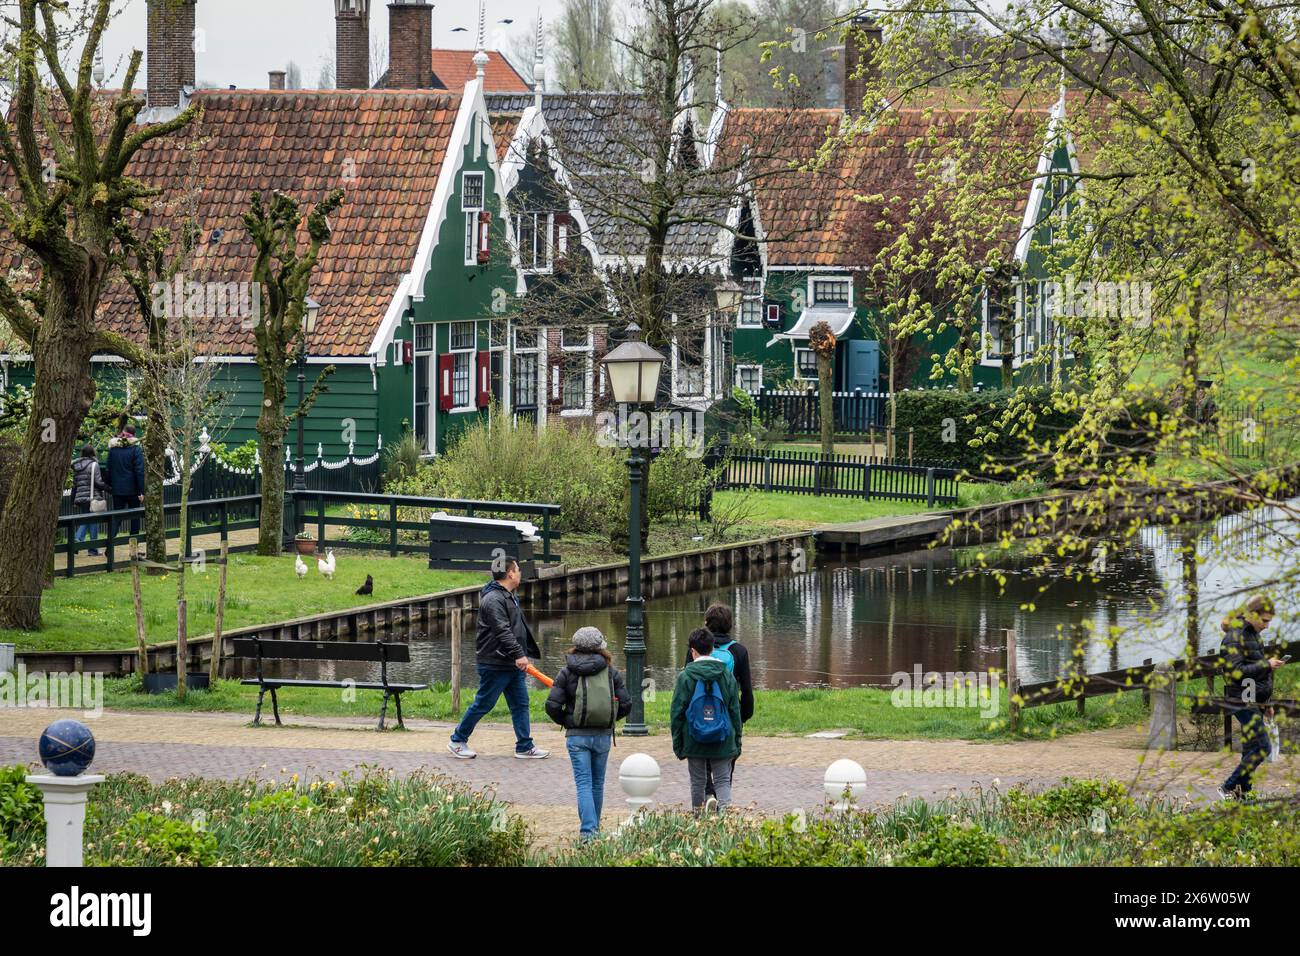 Zaanse Schans, typical traditional houses next to the canal, Zaanstad Municipality, European Route of Industrial Heritage, Netherlands. Stock Photo